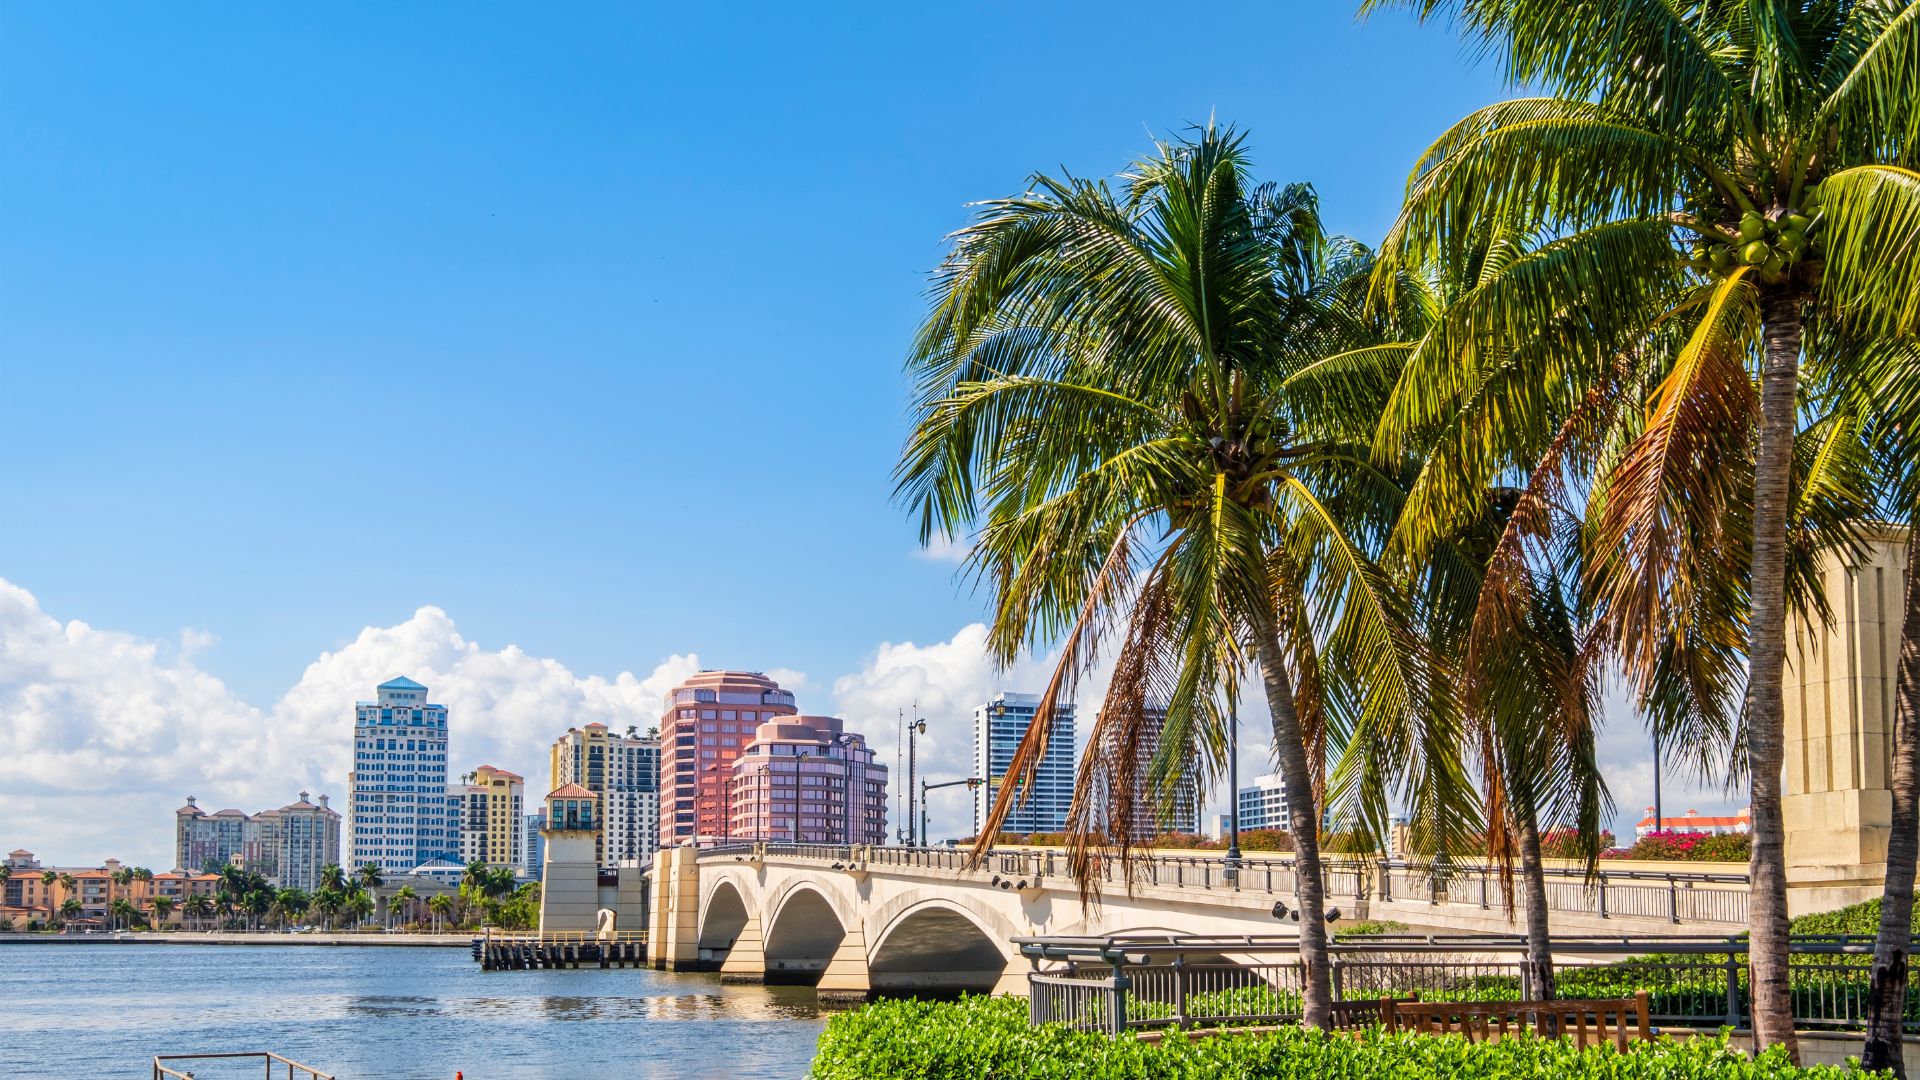 Bridge in West Palm Beach connecting palm trees to downtown